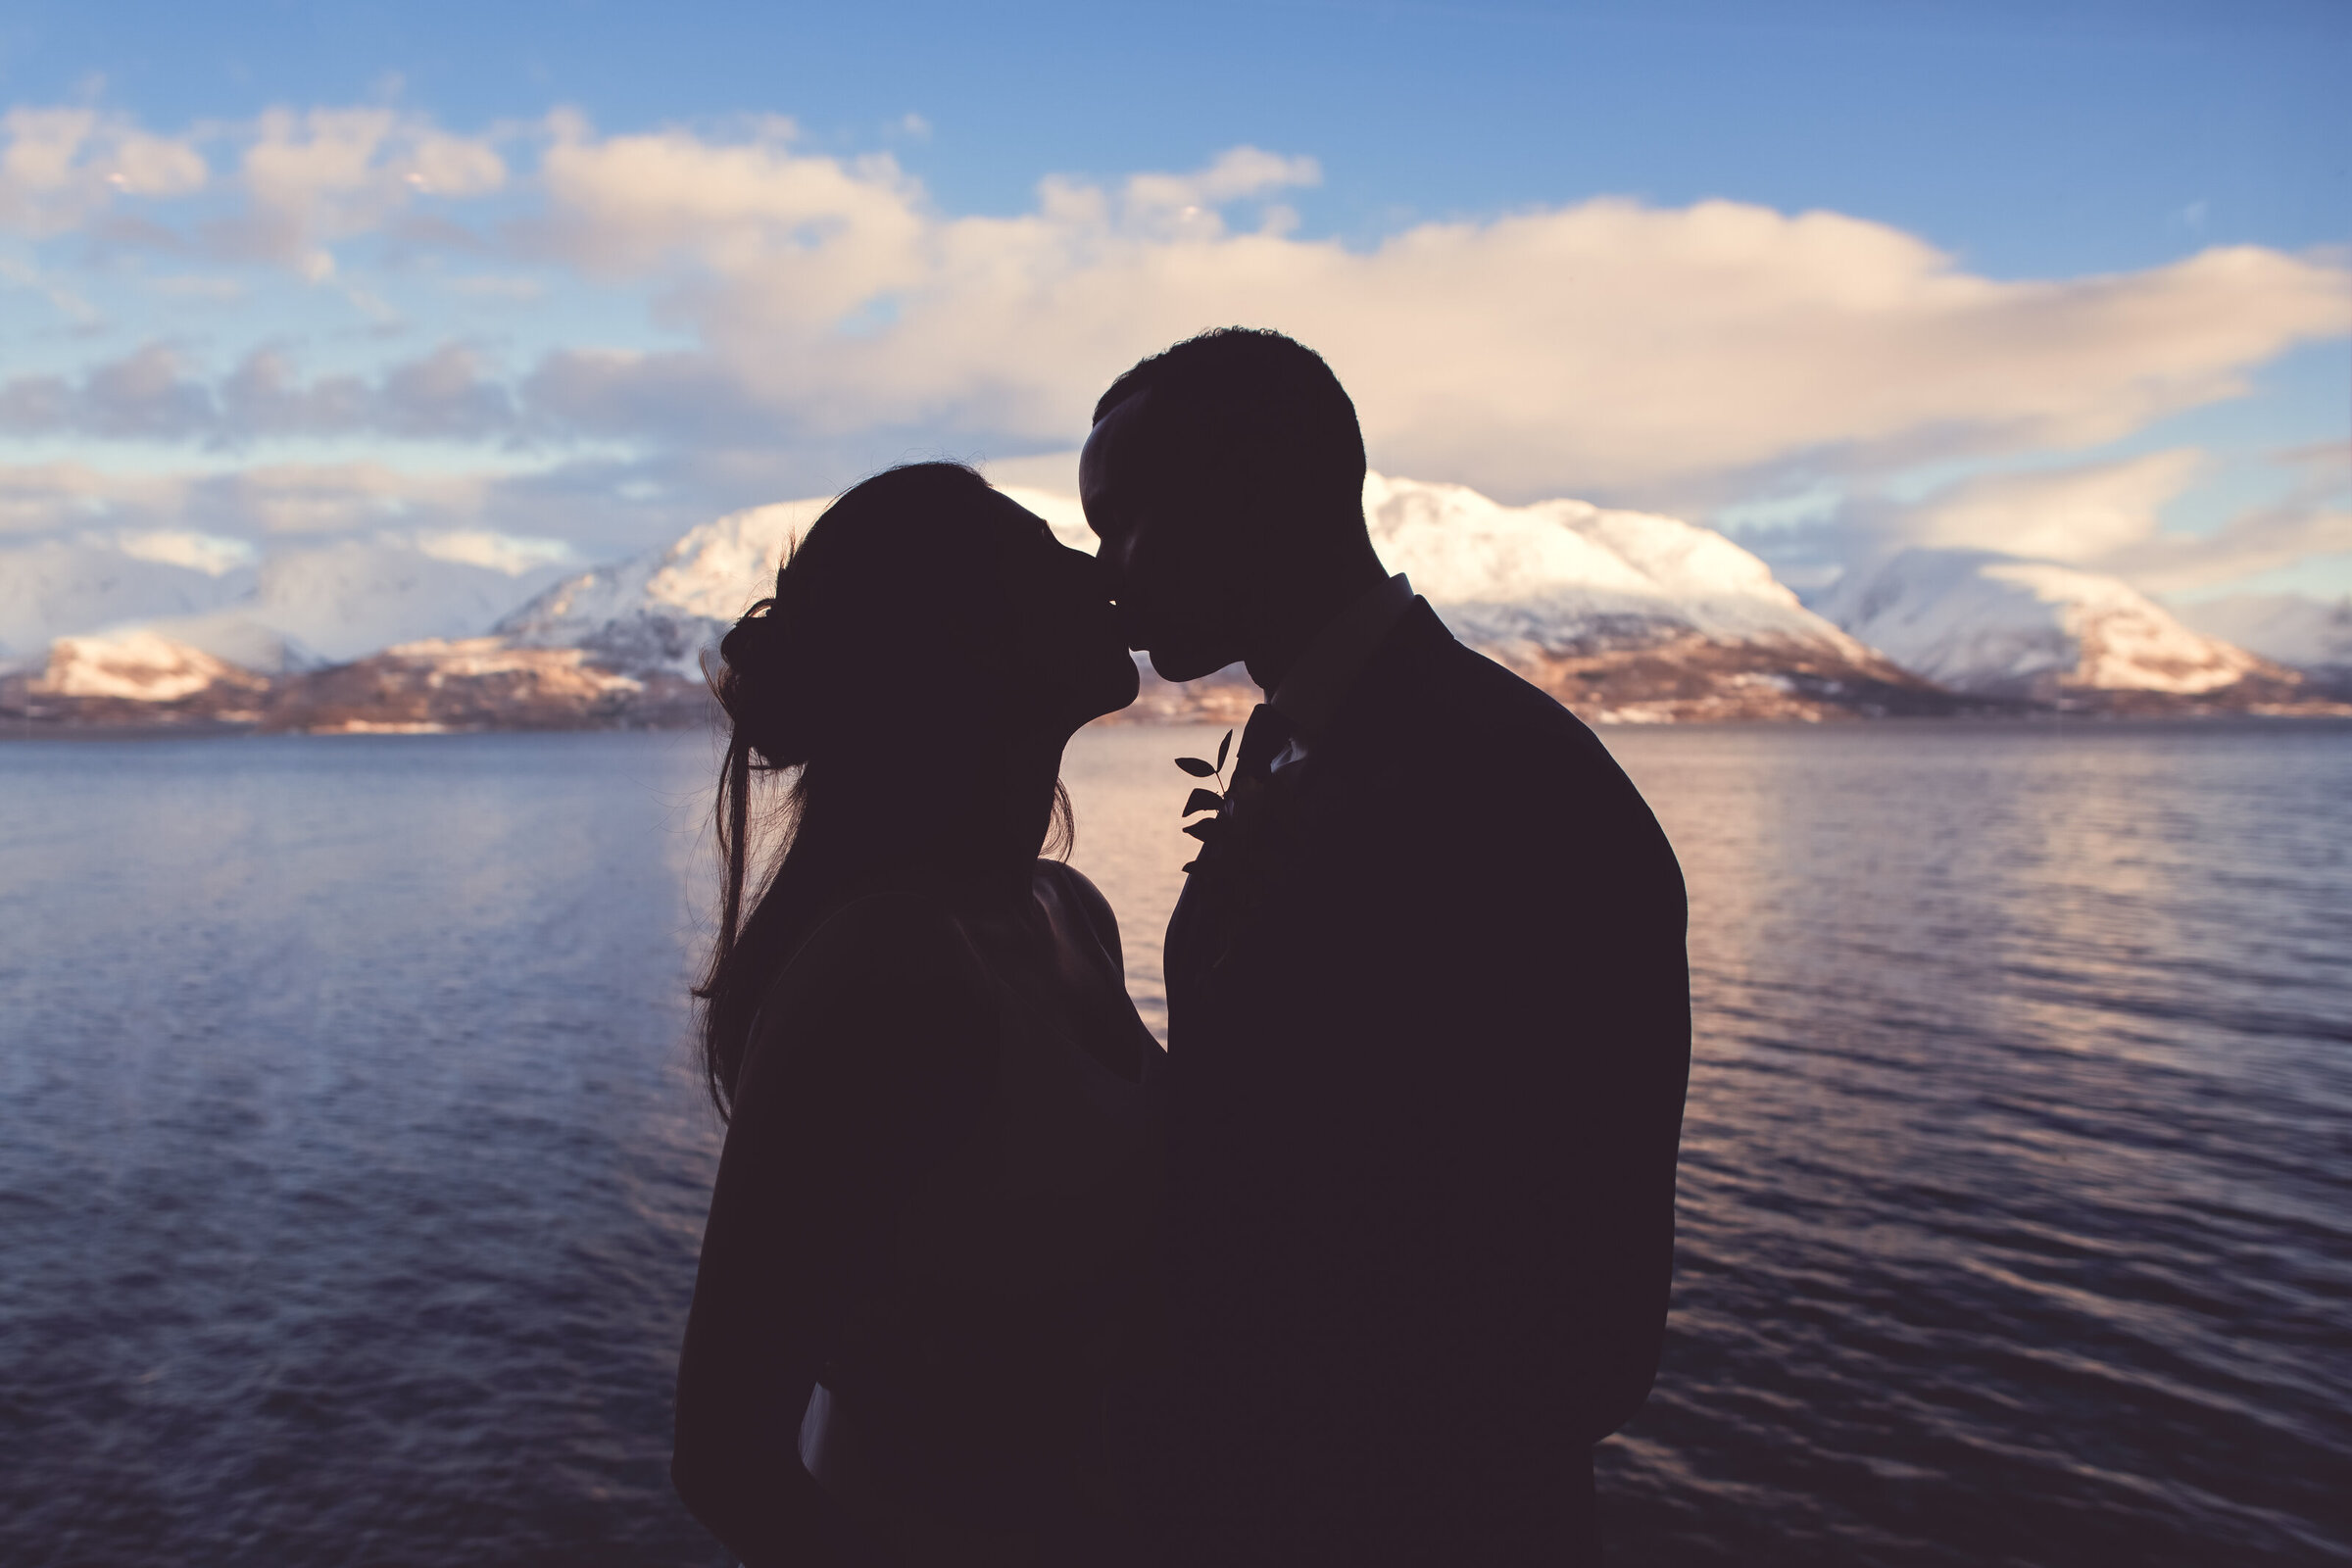 A couple silhouetted against a sunset in Tromsø, Norway, sharing a kiss with mountains in the distance, a romantic elopement moment captured in time.